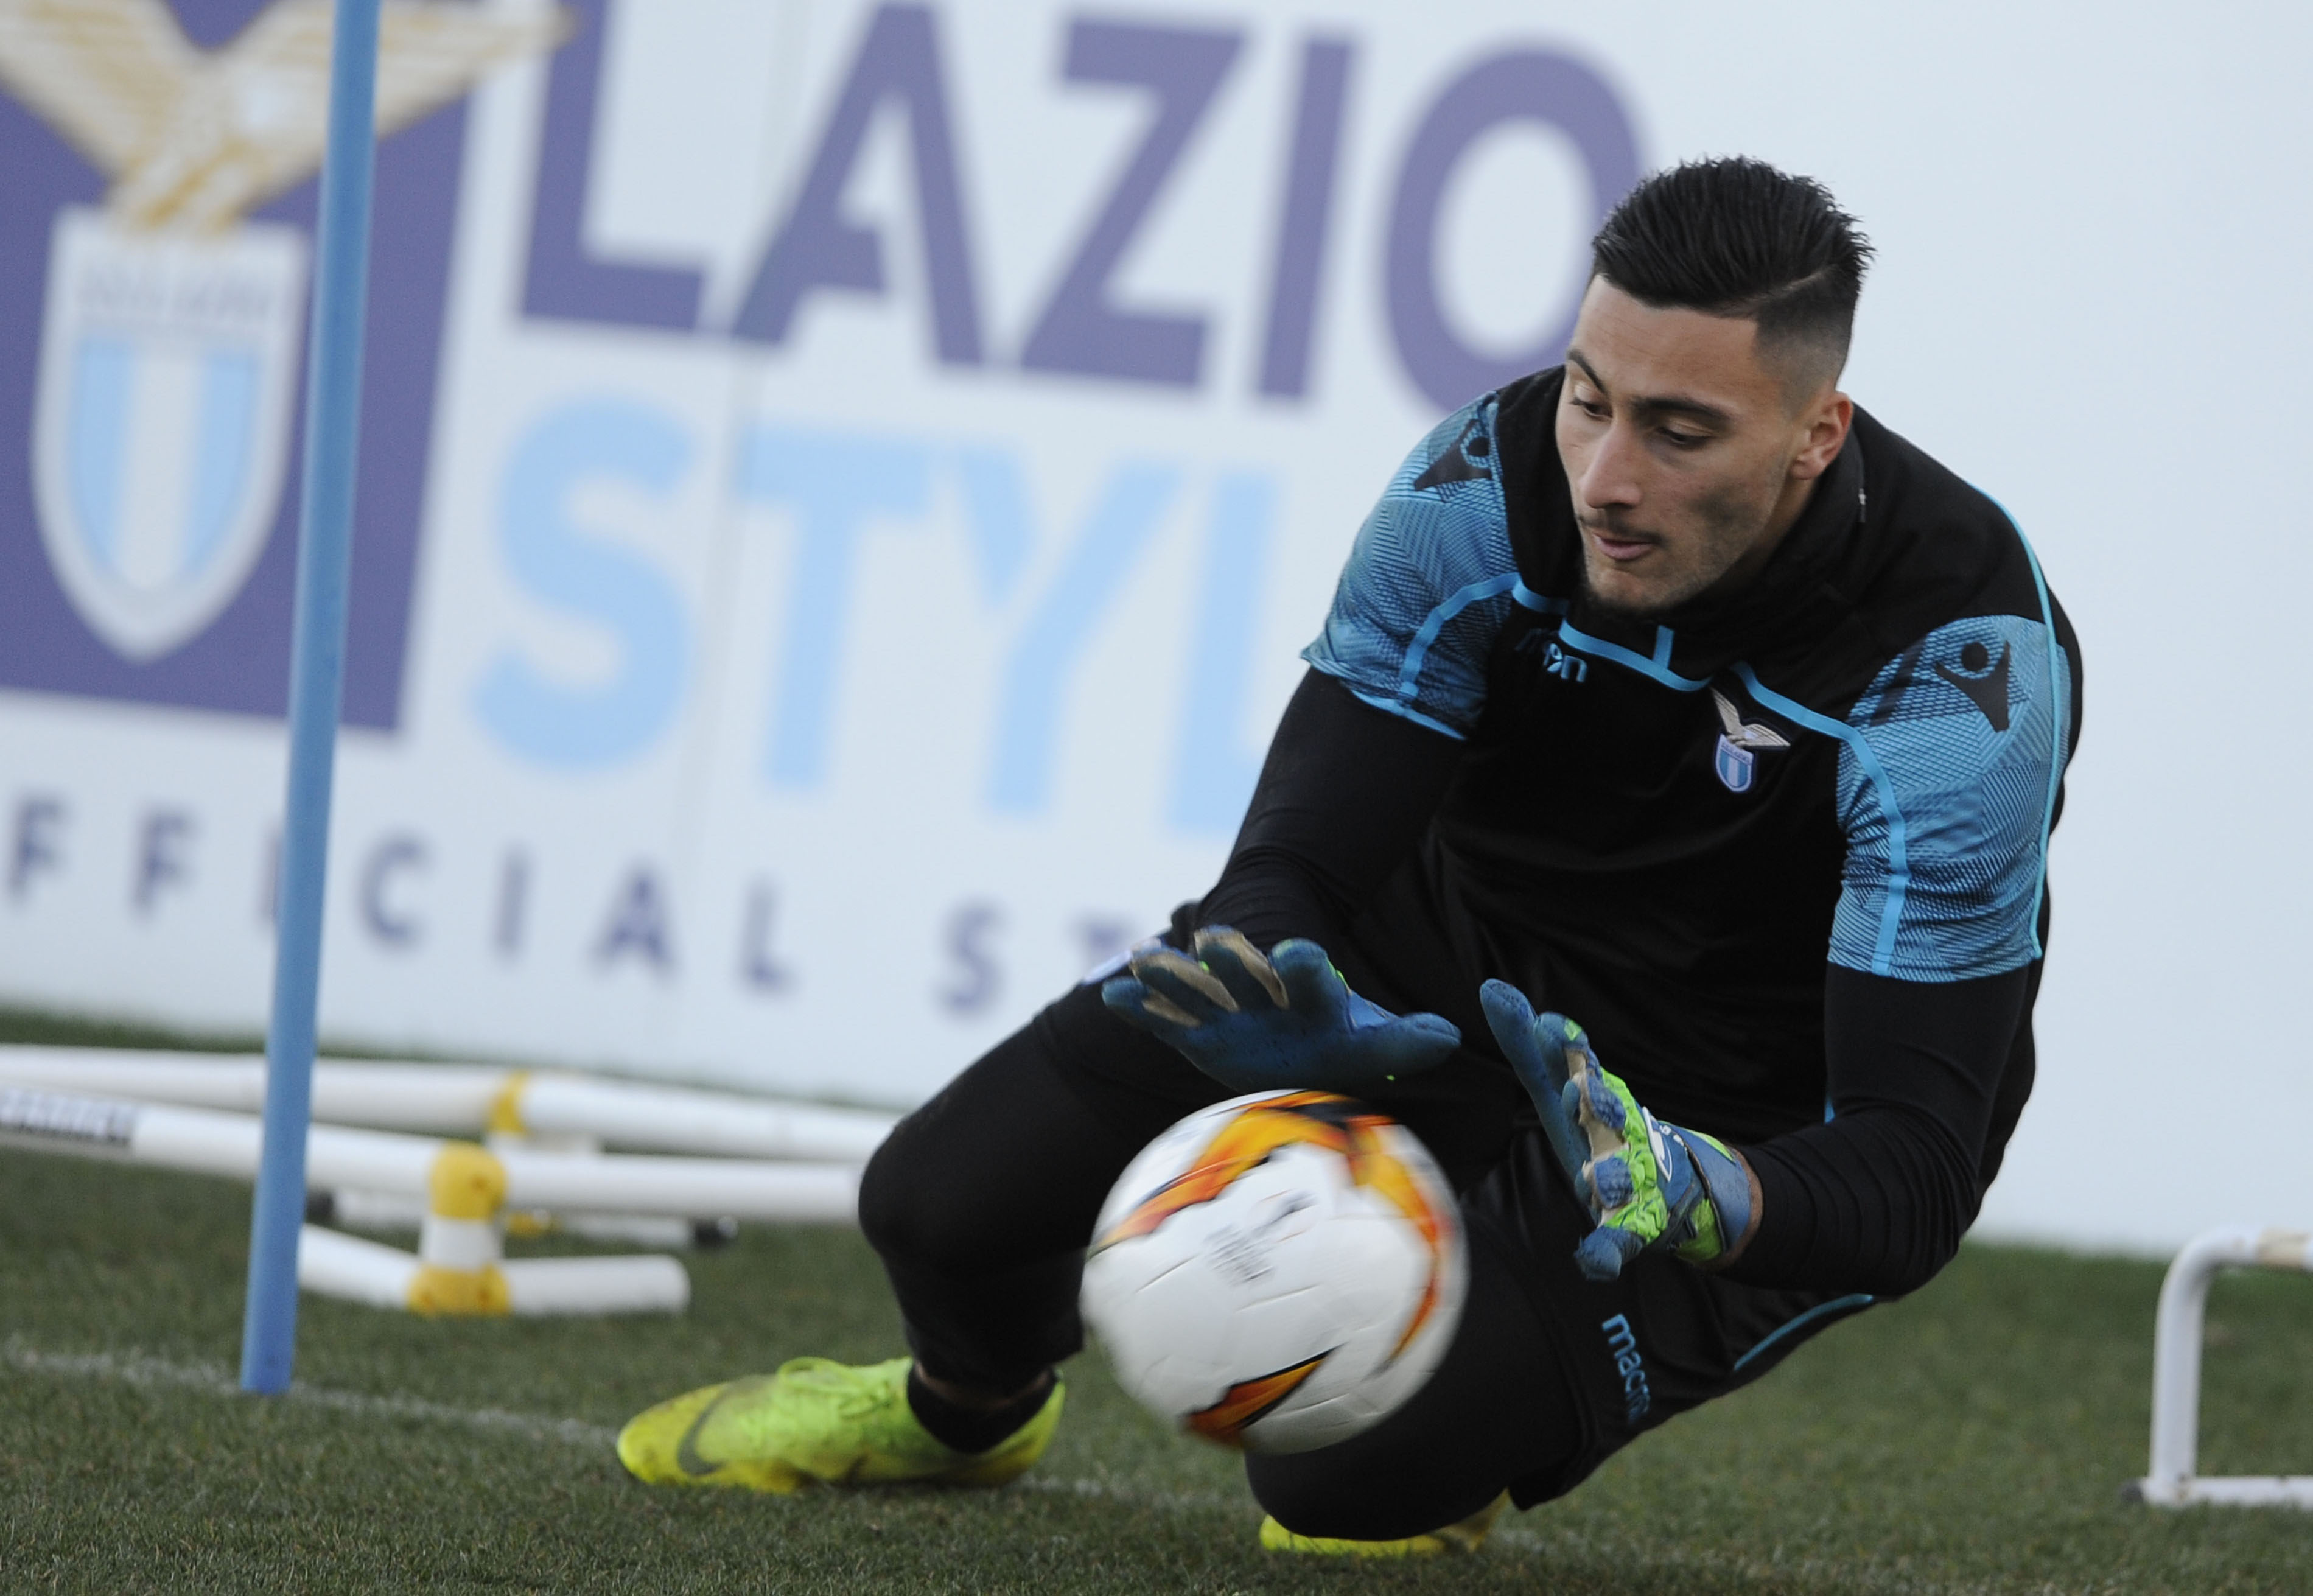 Lazio keeper Stakosha is linked with a move to the Premier League. (Photo by Marco Rosi/Getty Images)